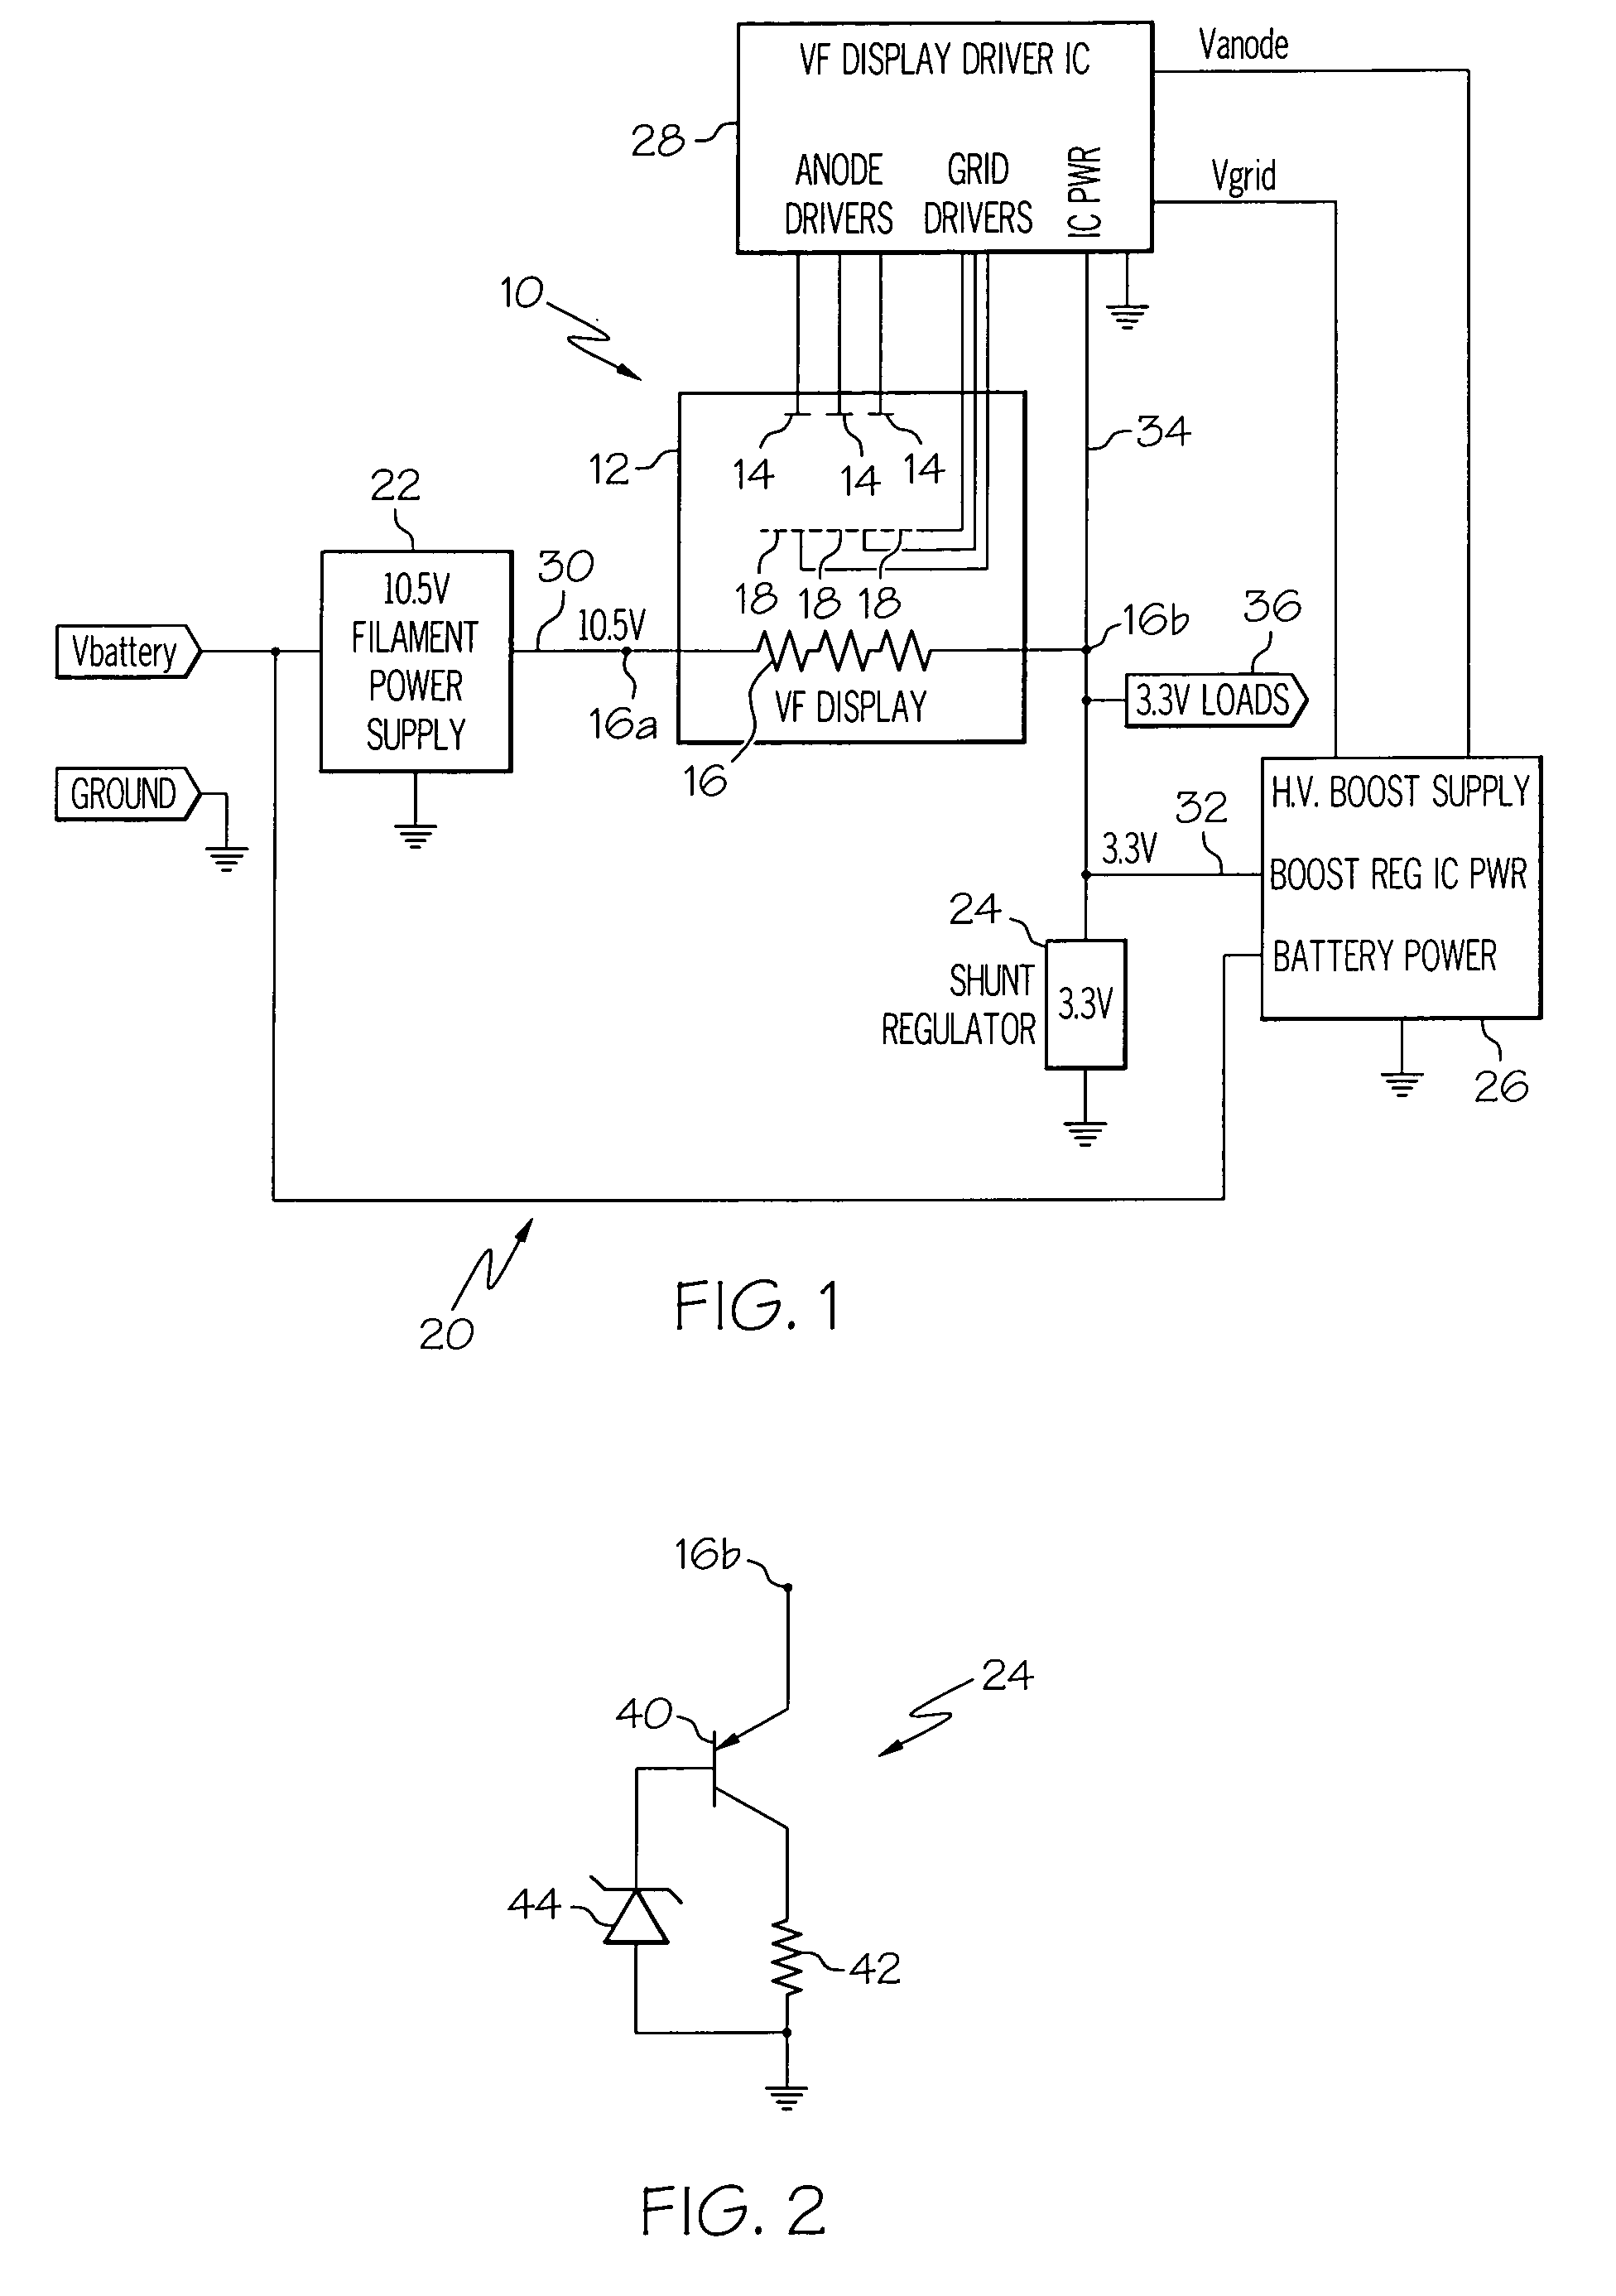 Drive apparatus for a vacuum fluorescent display